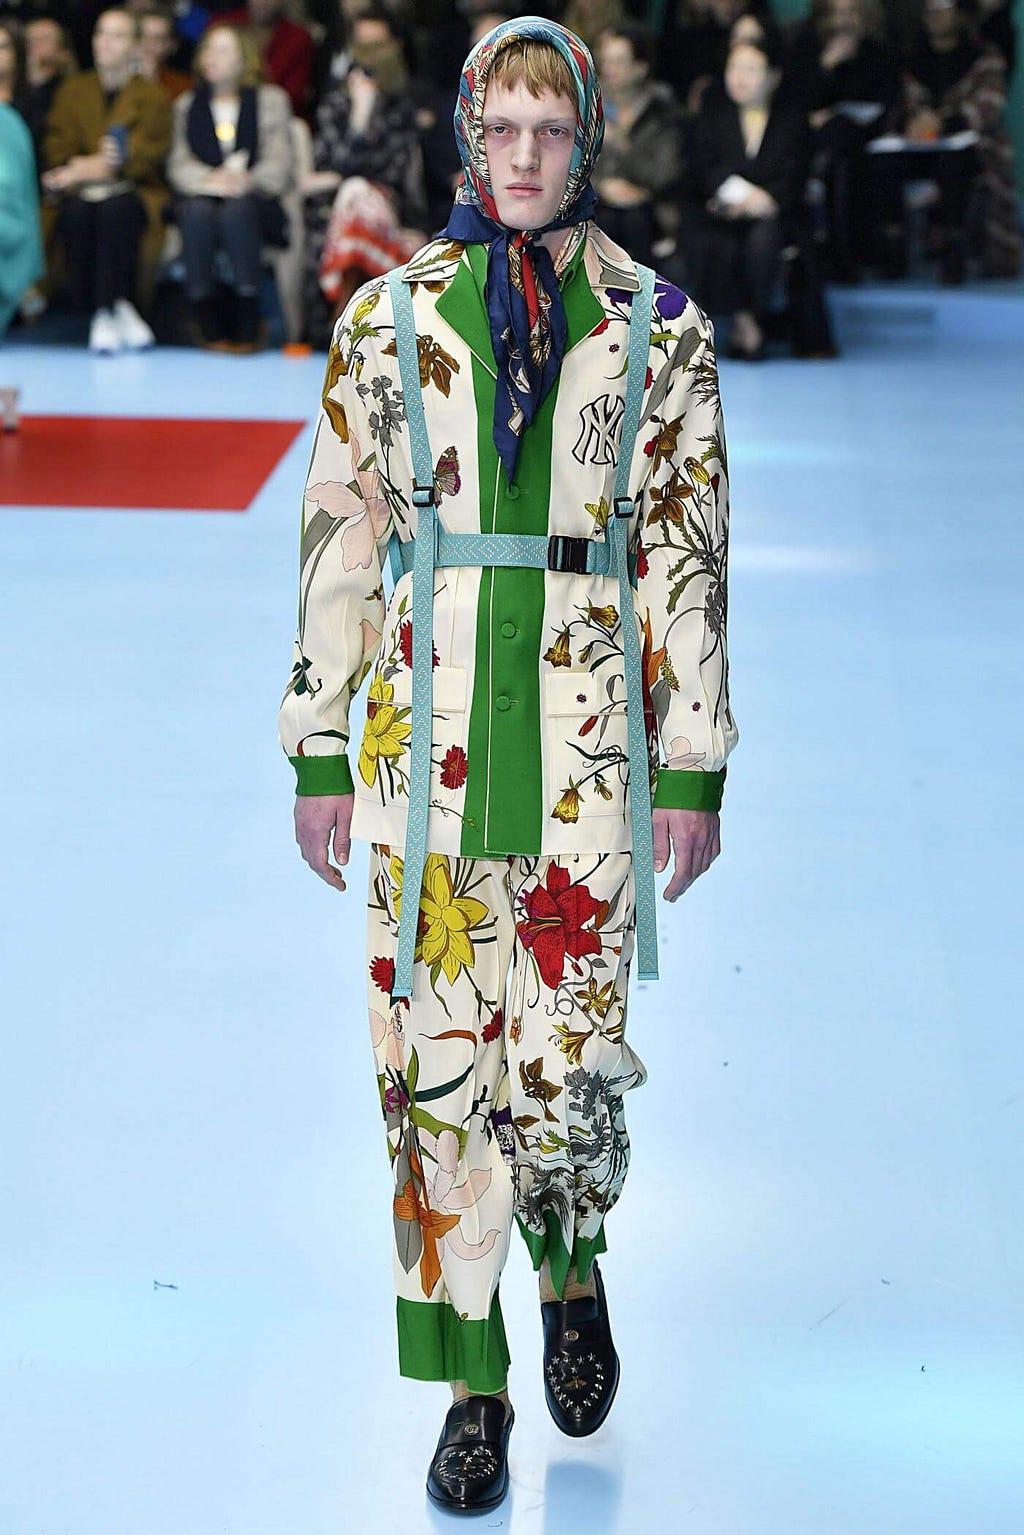 Male model on the fashion show wearing Gucci